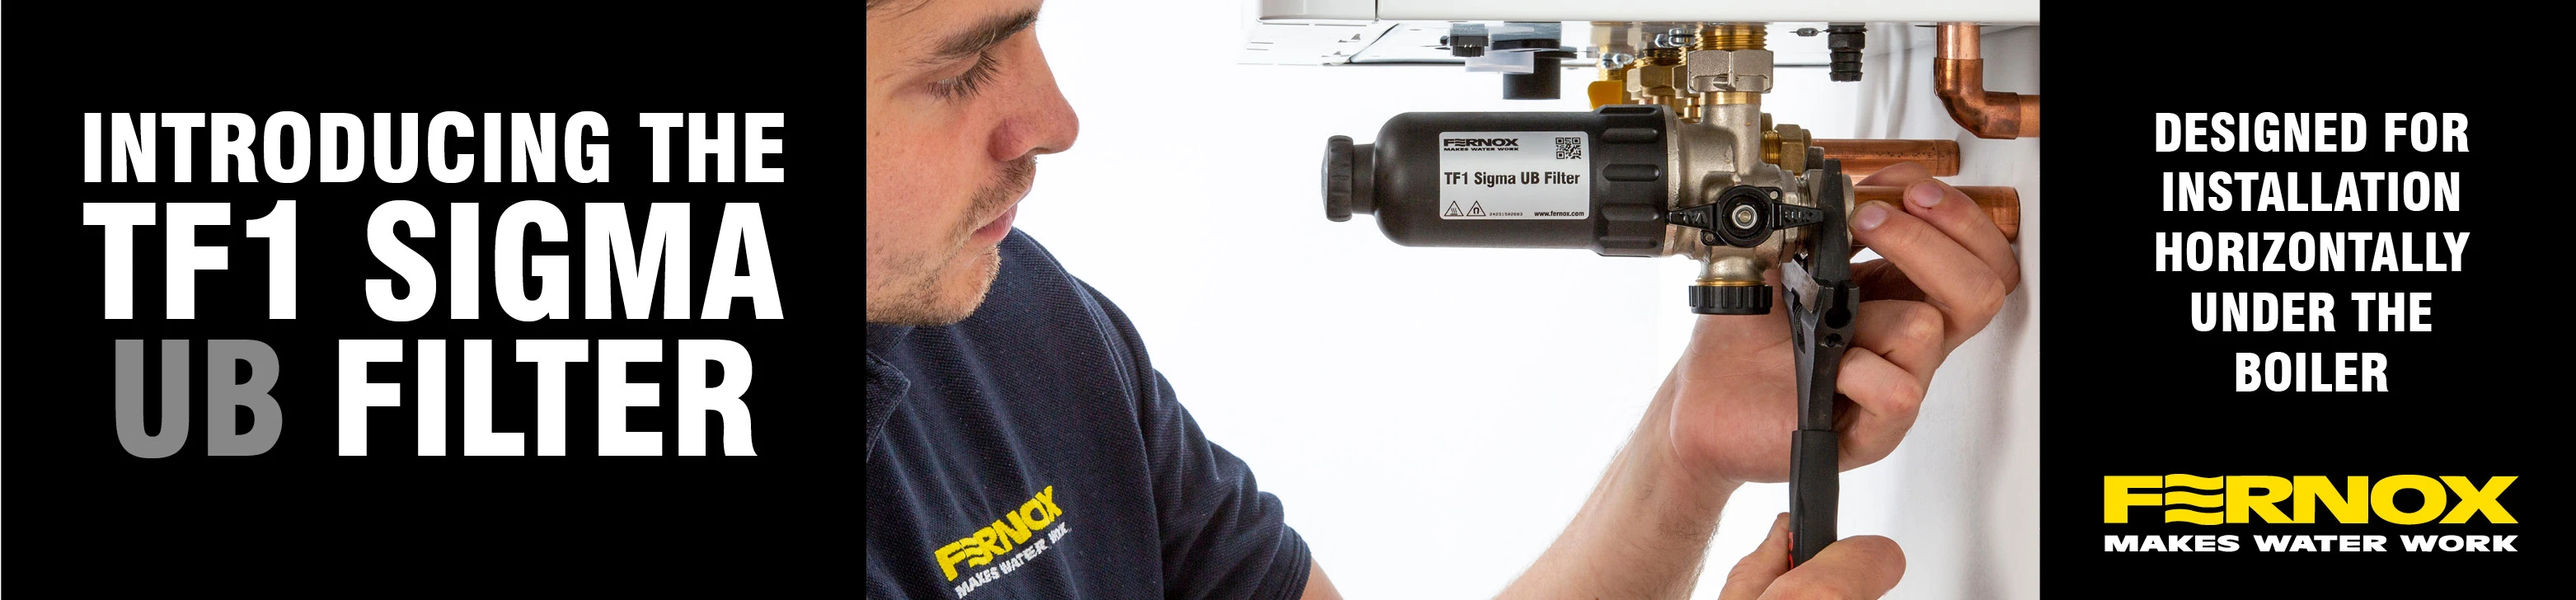 Fernox Banner Image - Introducing the TF1 Sigma UB Filter